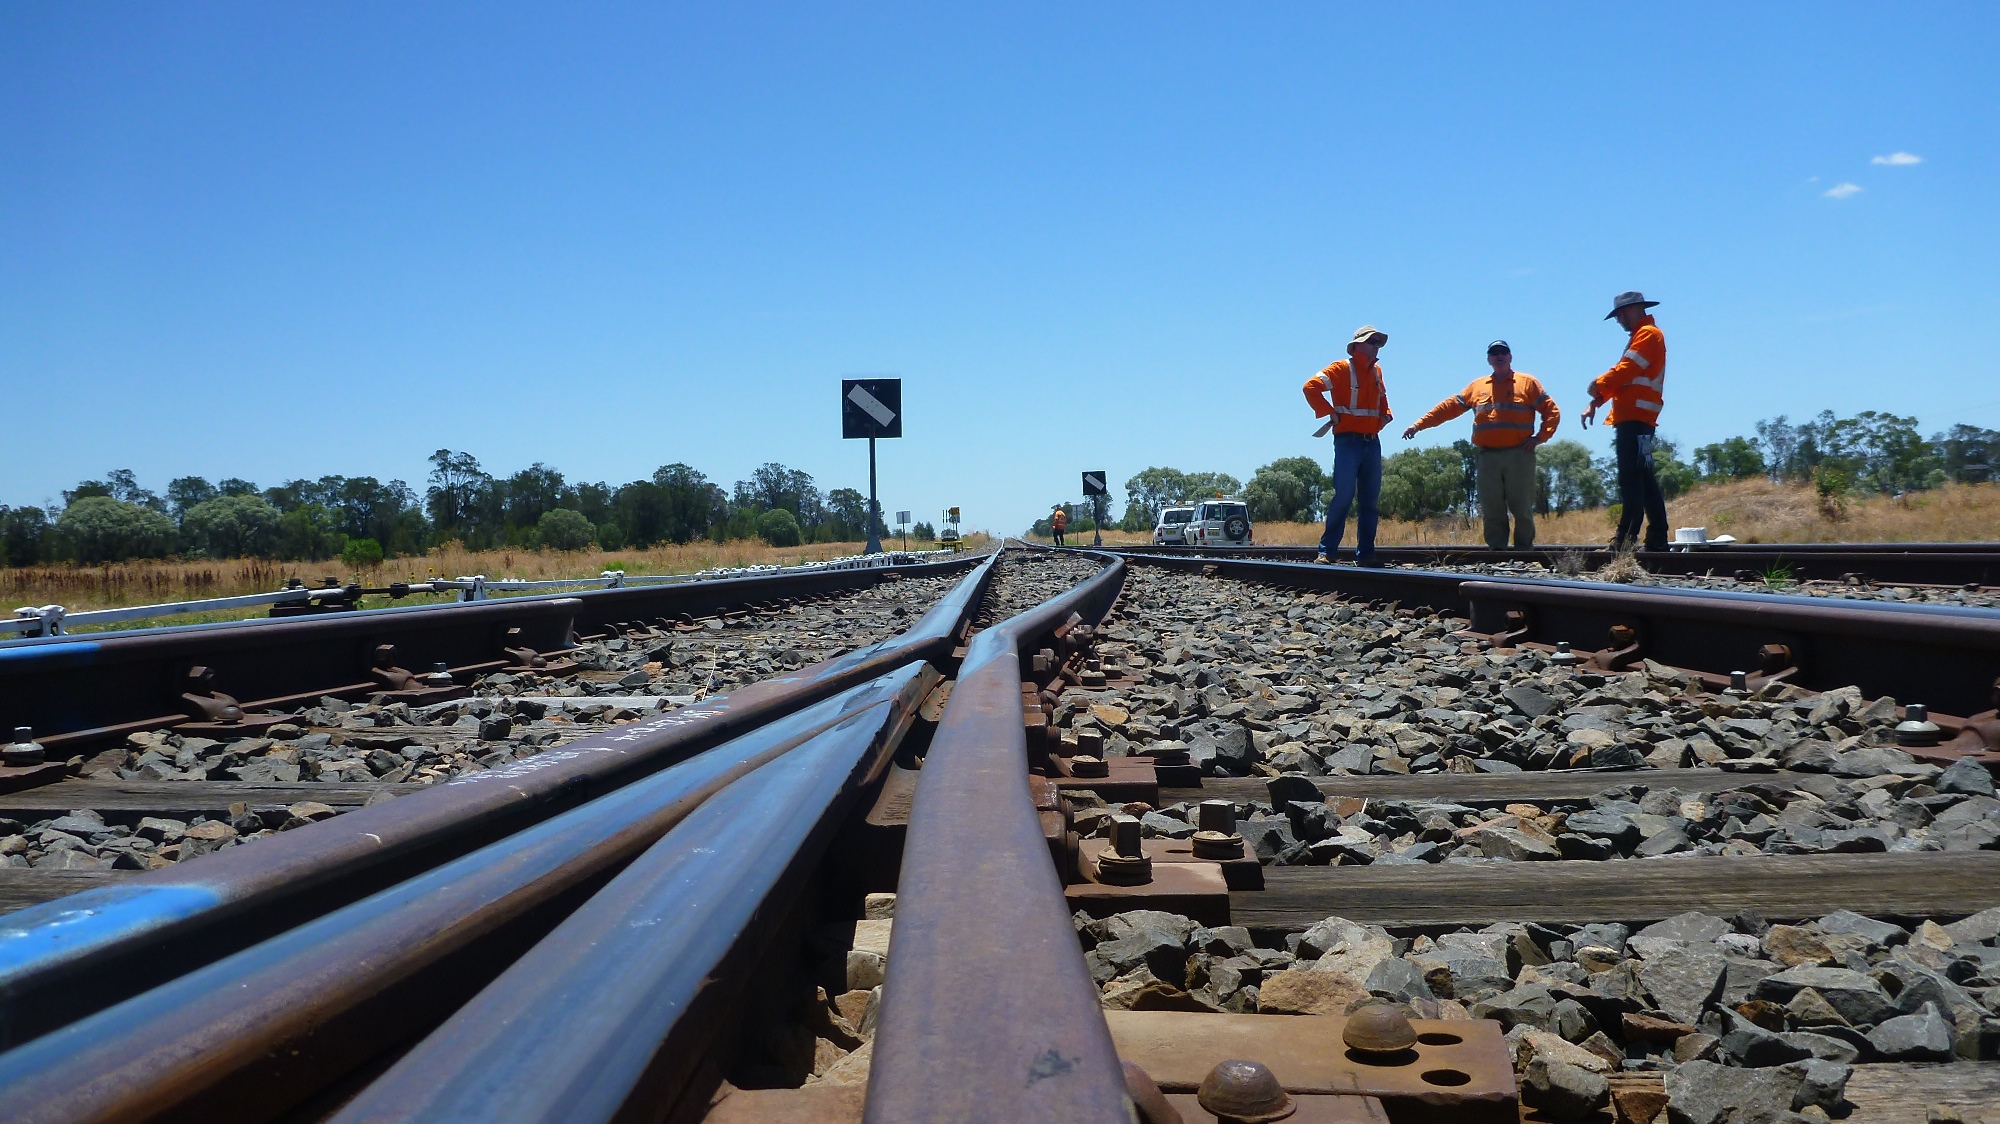 Rail workers on the tracks talking